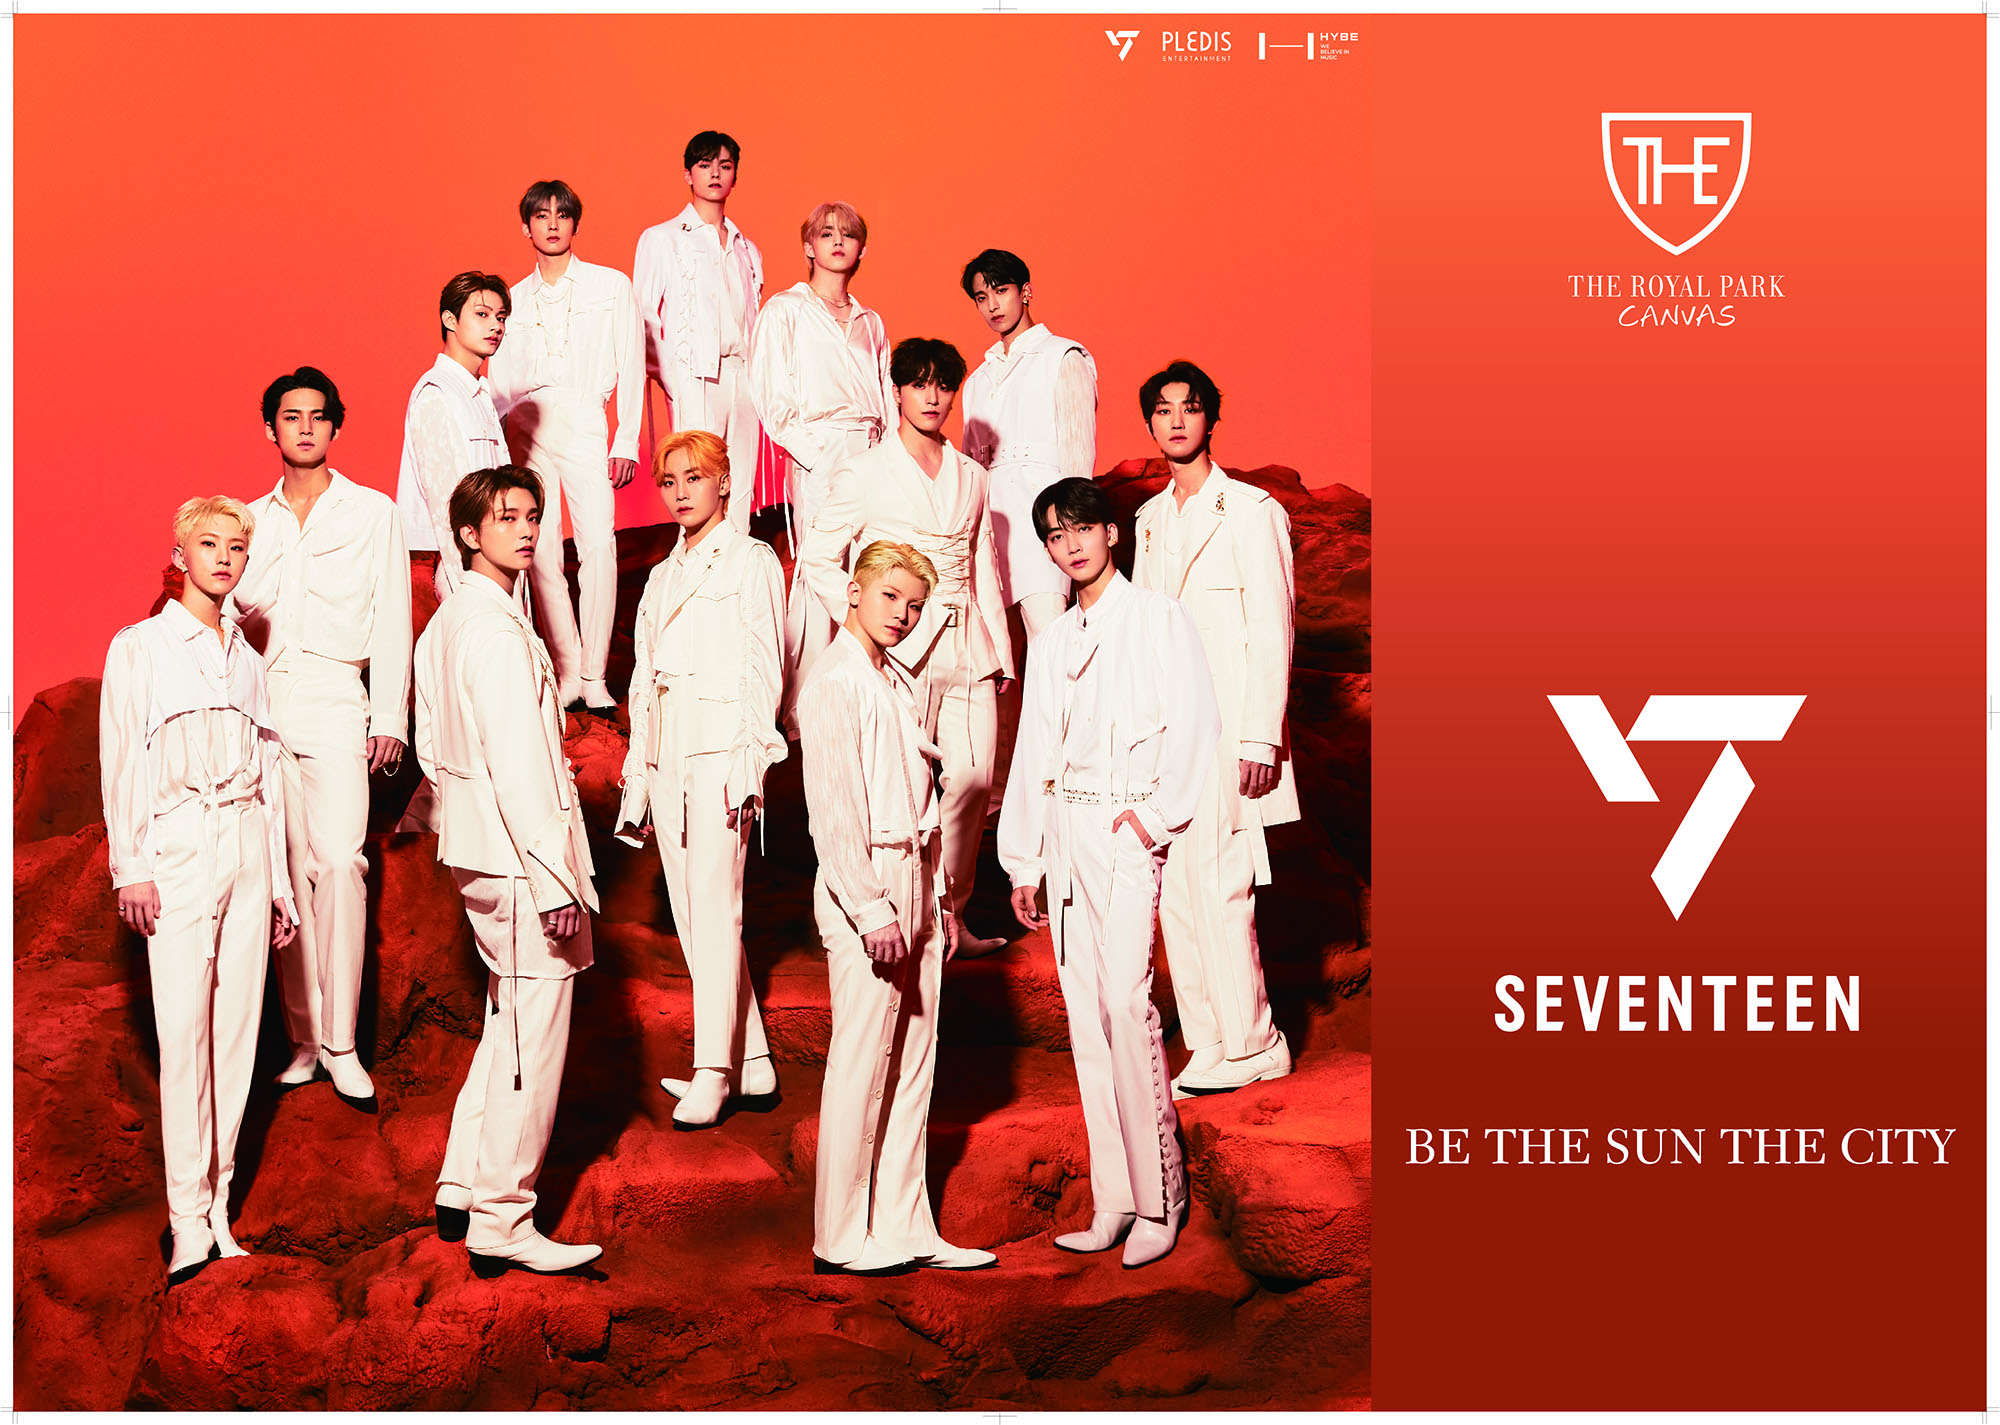 SEVENTEEN BE THE SUN THE CITY ×ザ ロイヤルパーク キャンバス 限定